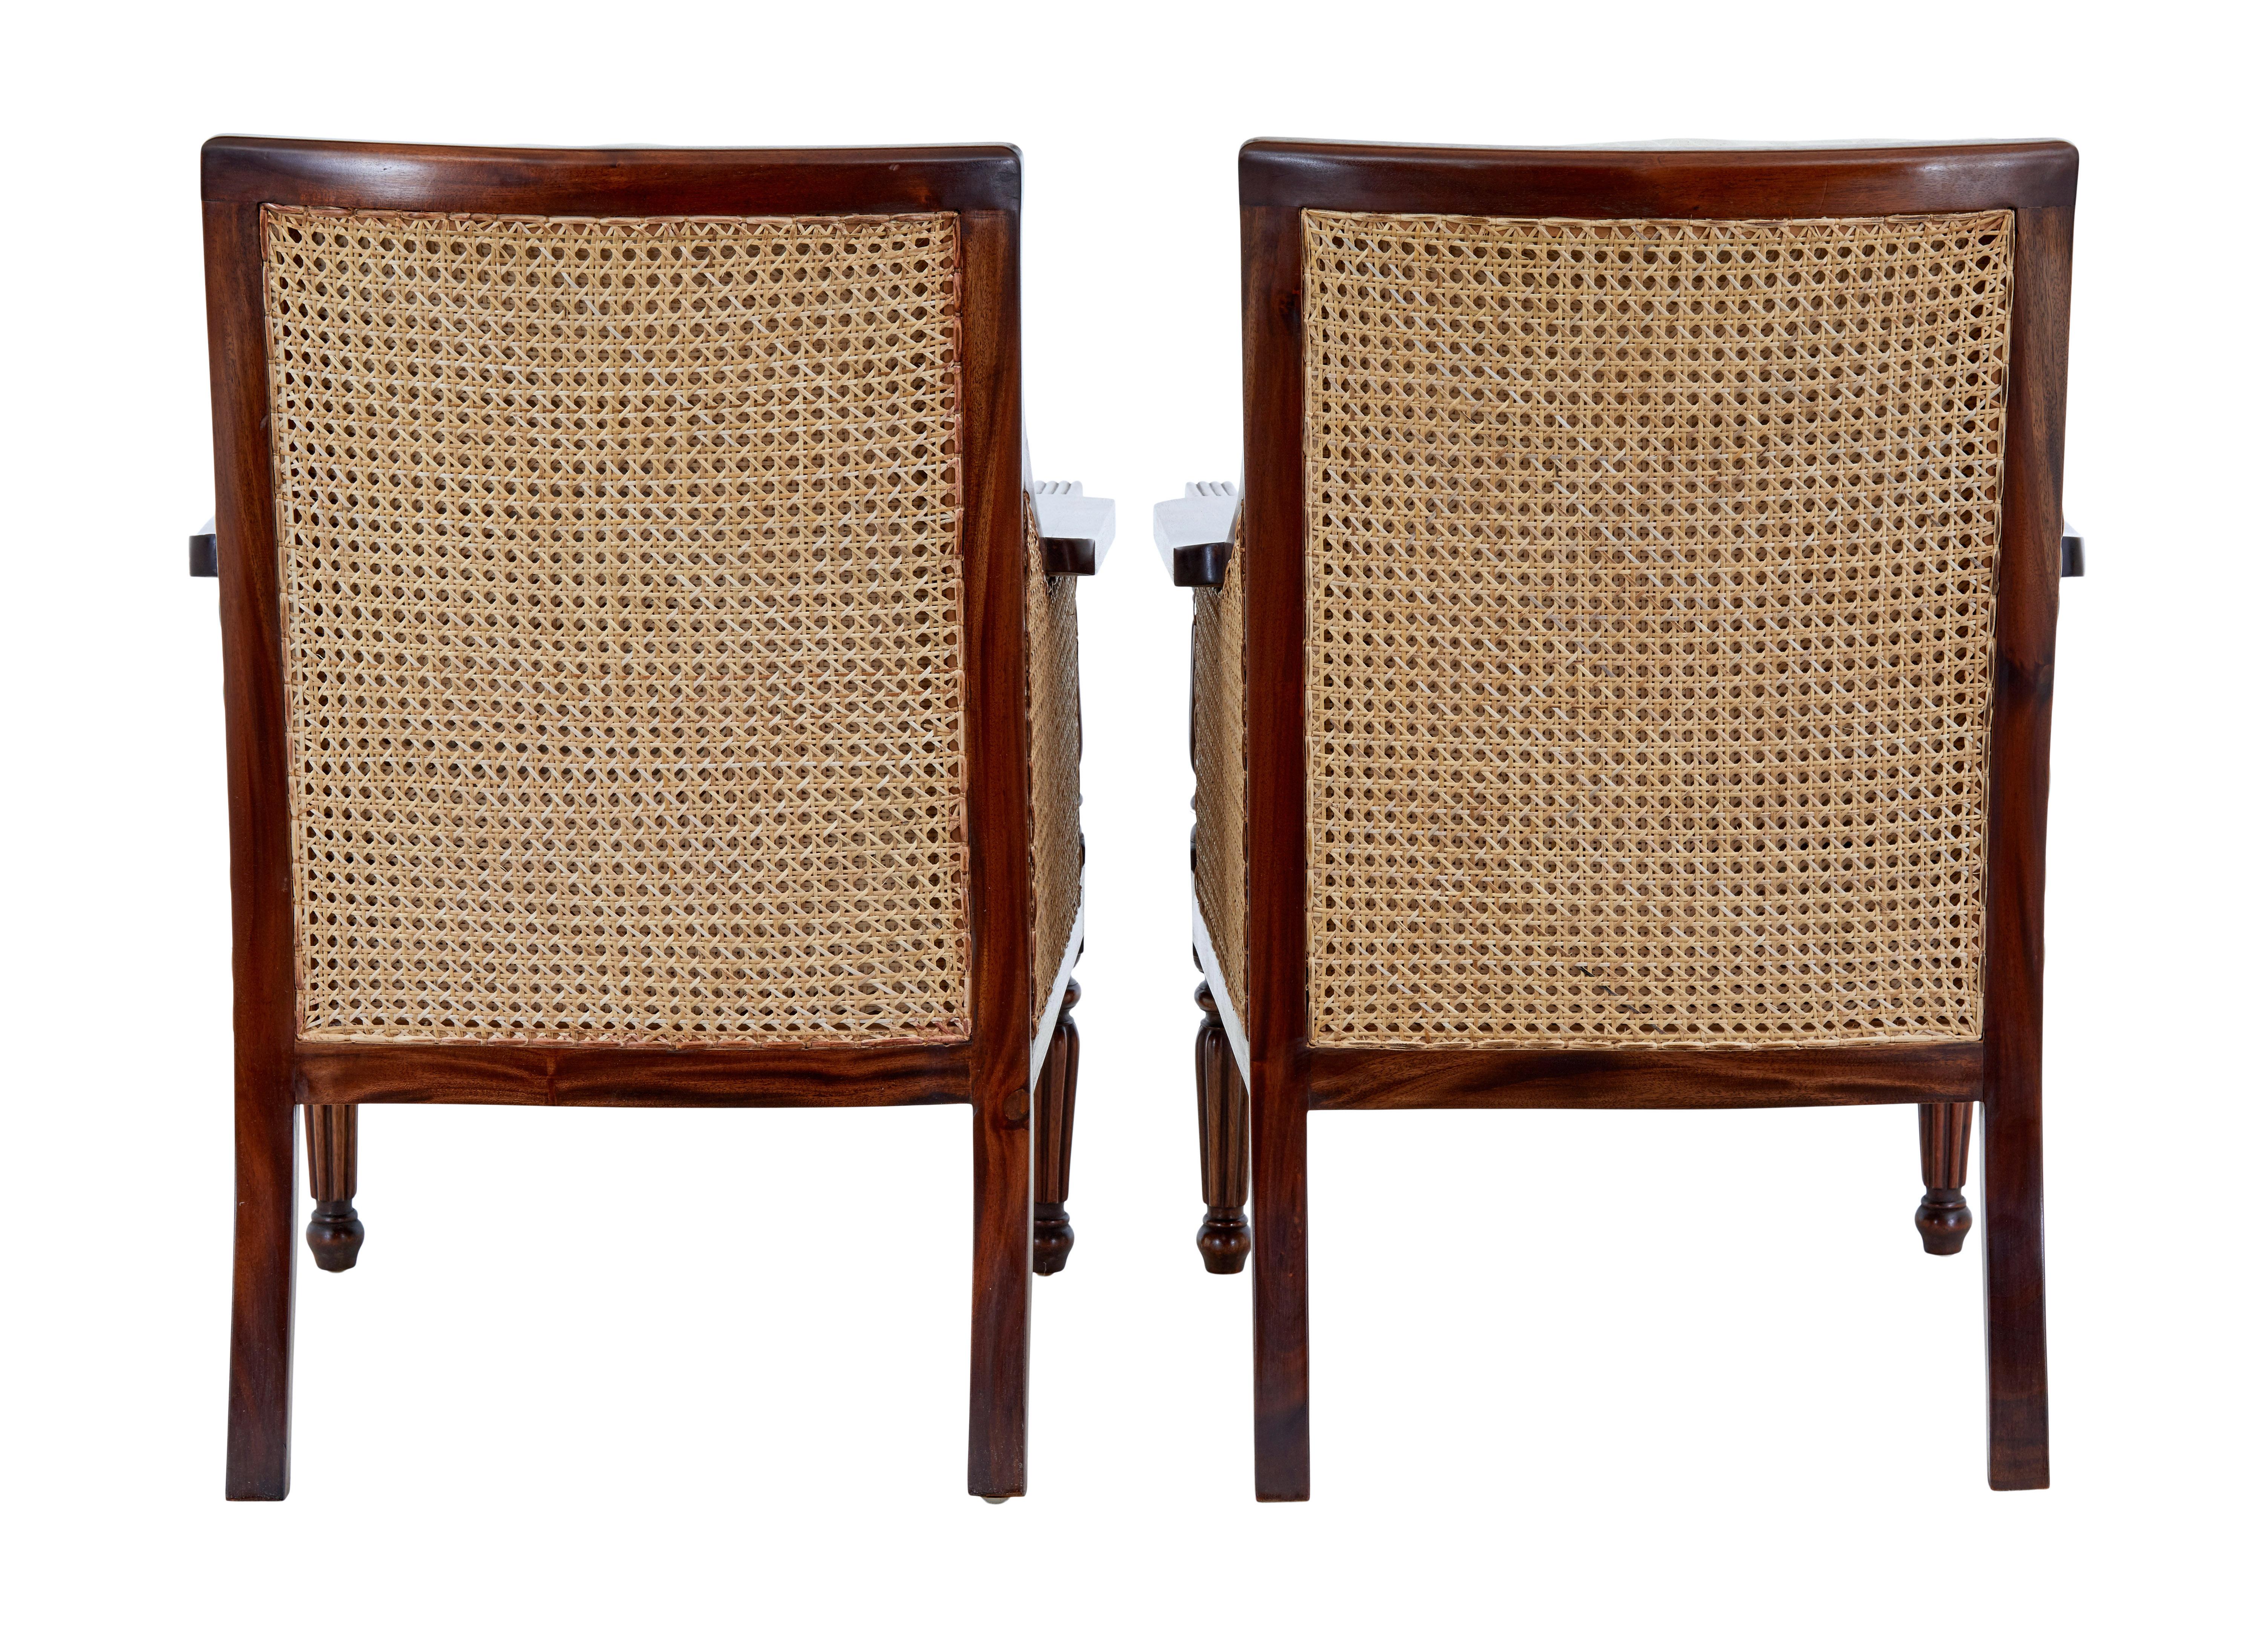 English Pair of Bergere Cane Work Lounge Chairs